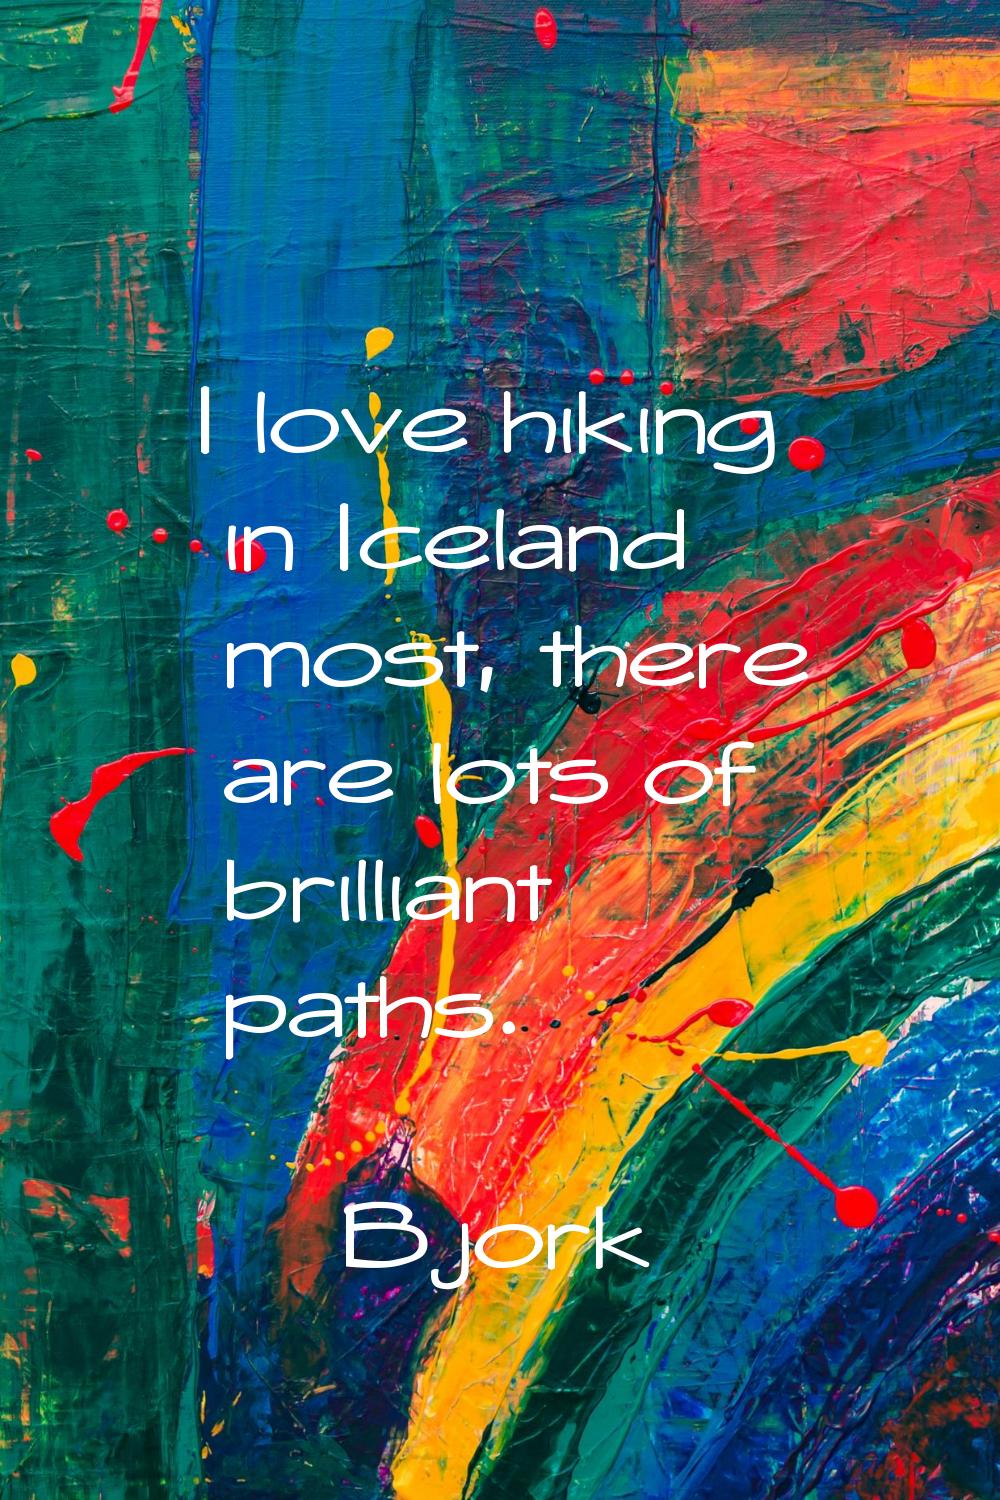 I love hiking in Iceland most, there are lots of brilliant paths.